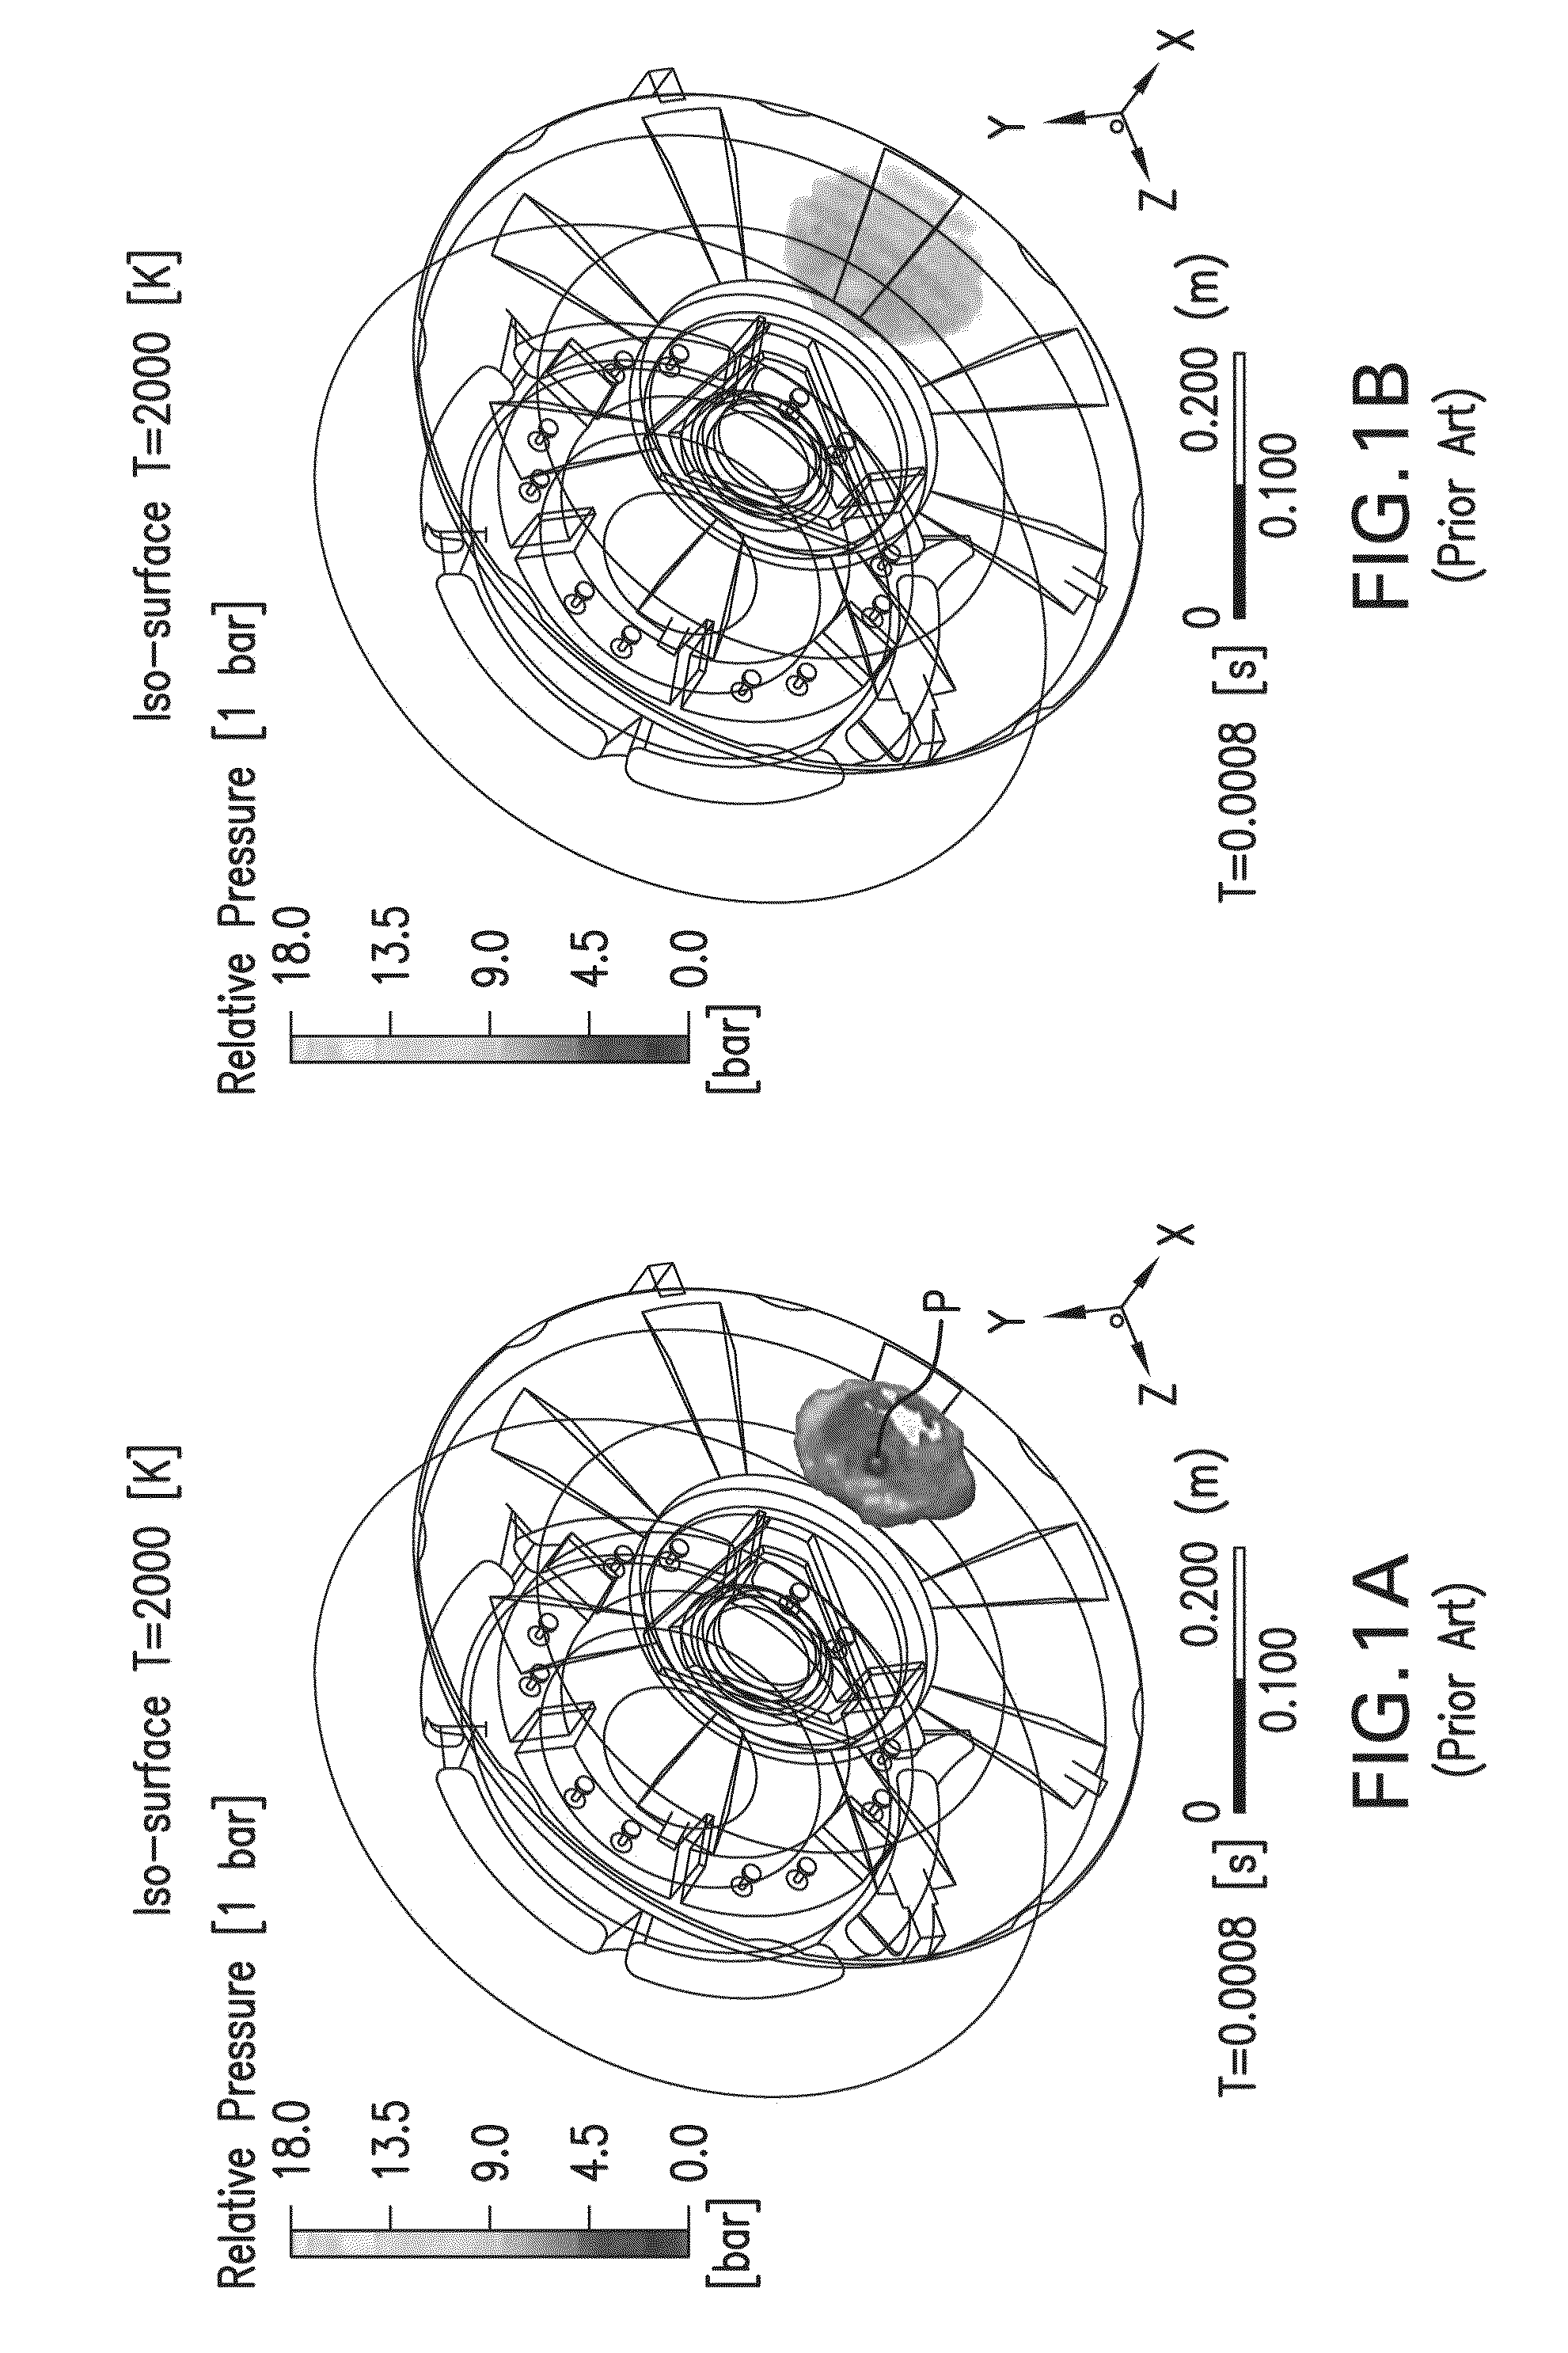 Internal Pressure Attenuator Device for Rotating Electrical Machines Able To Operate in Explosive Atmospheres